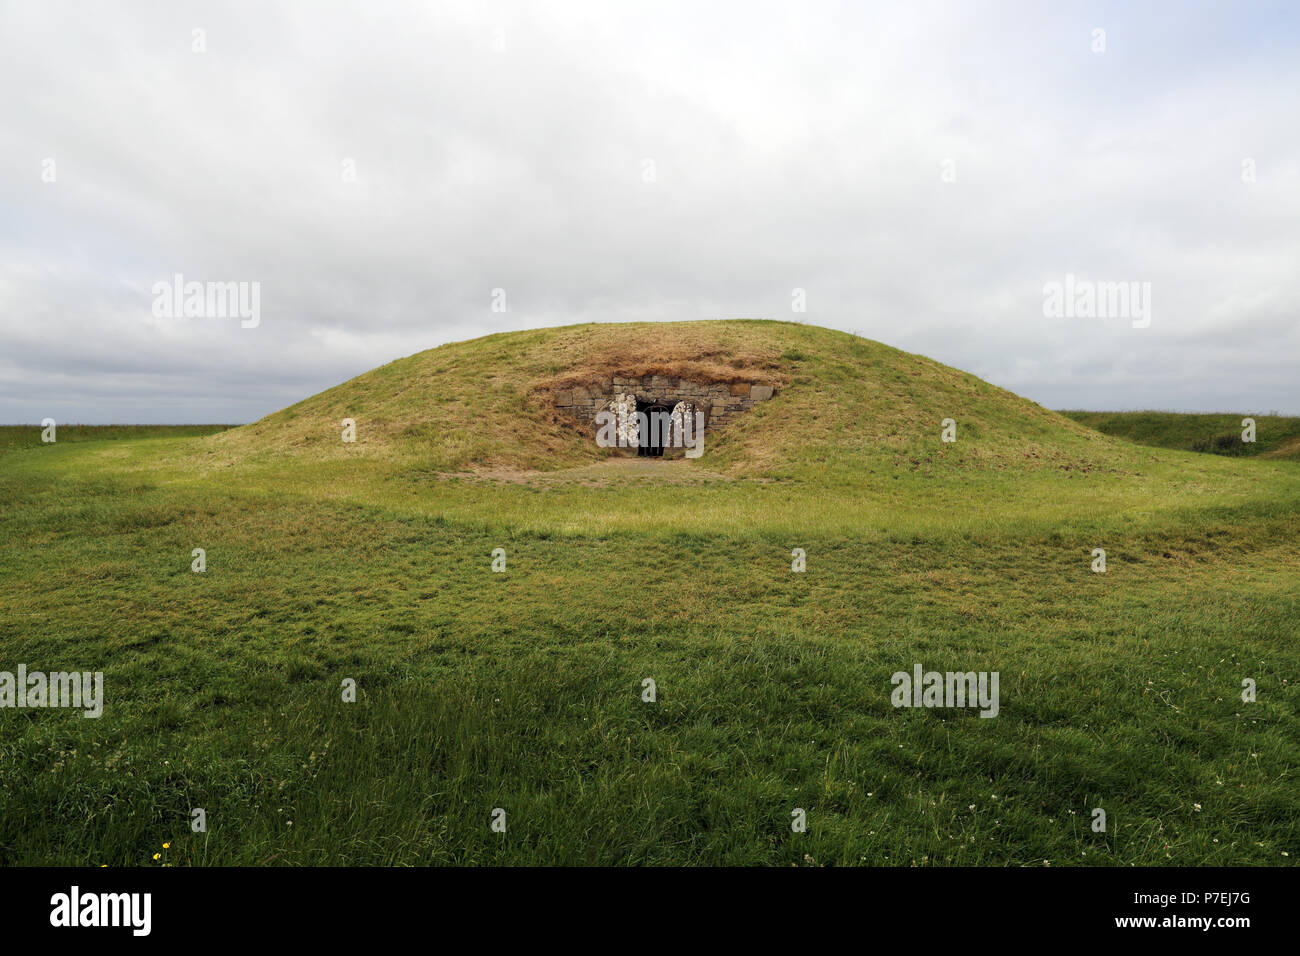 The Hill of Tara, located near the River Boyne, is an archaeological complex that runs between Navan and Dunshaughlin in County Meath, Ireland. It con Stock Photo